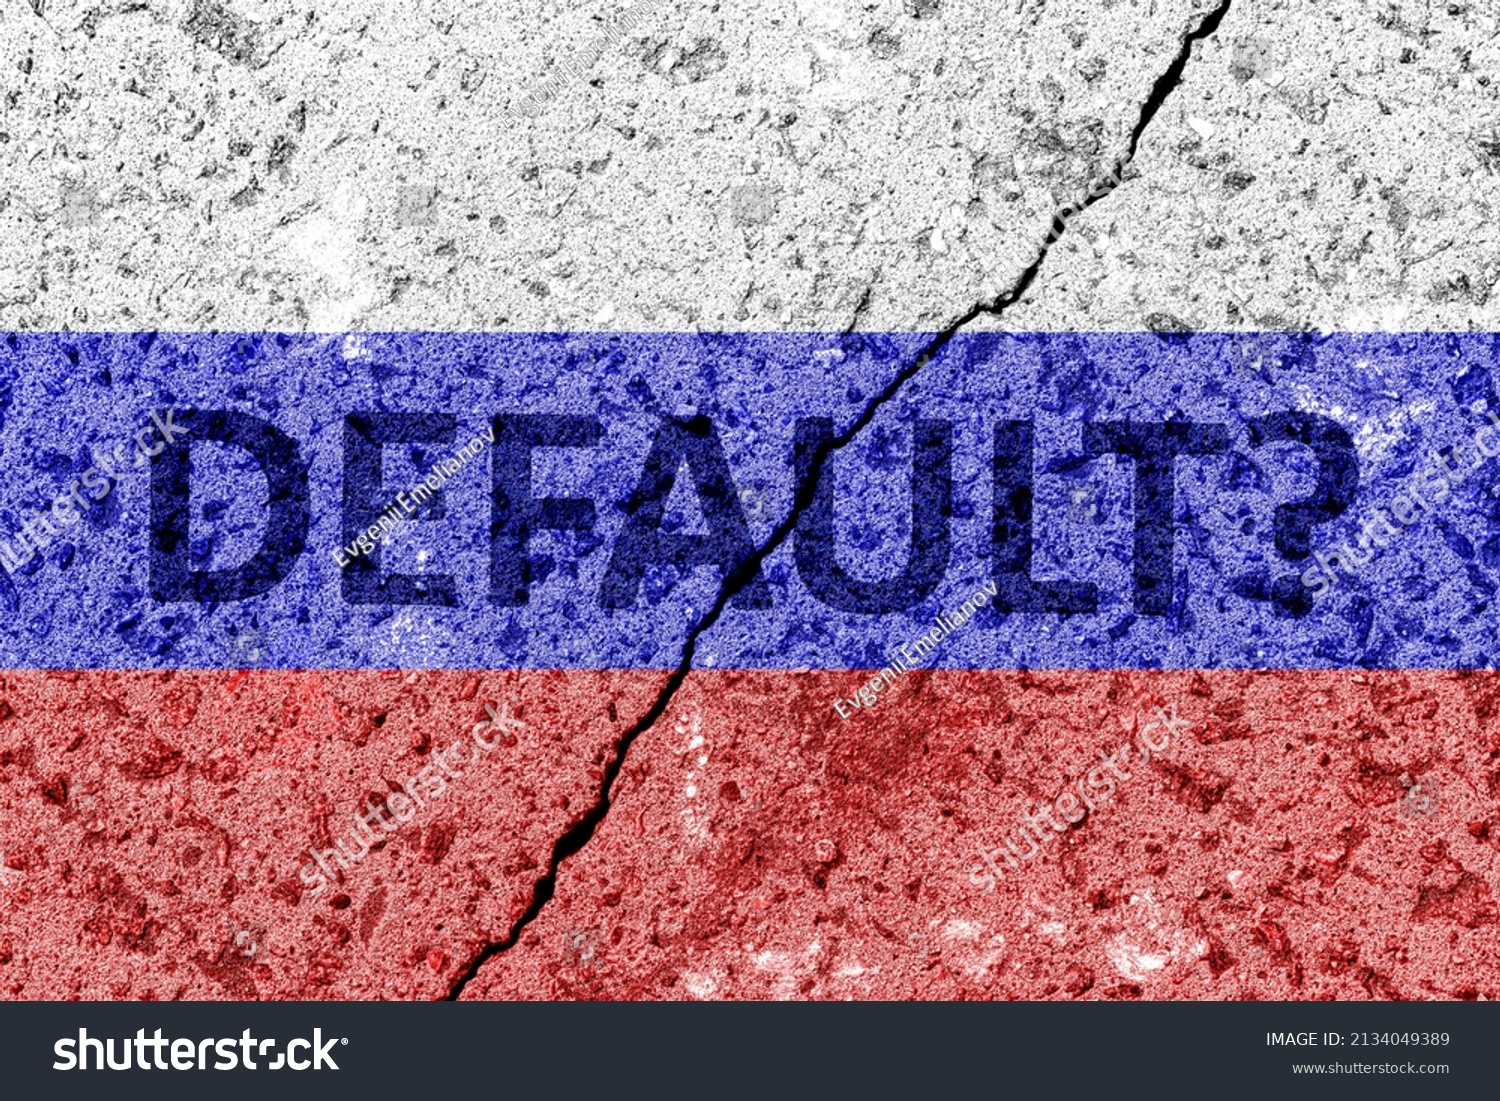 Russian Federation flag on cracked concrete wall. The concept of crisis, default, economic collapse or other problems in the country. Abstract disaster symbol. #2134049389